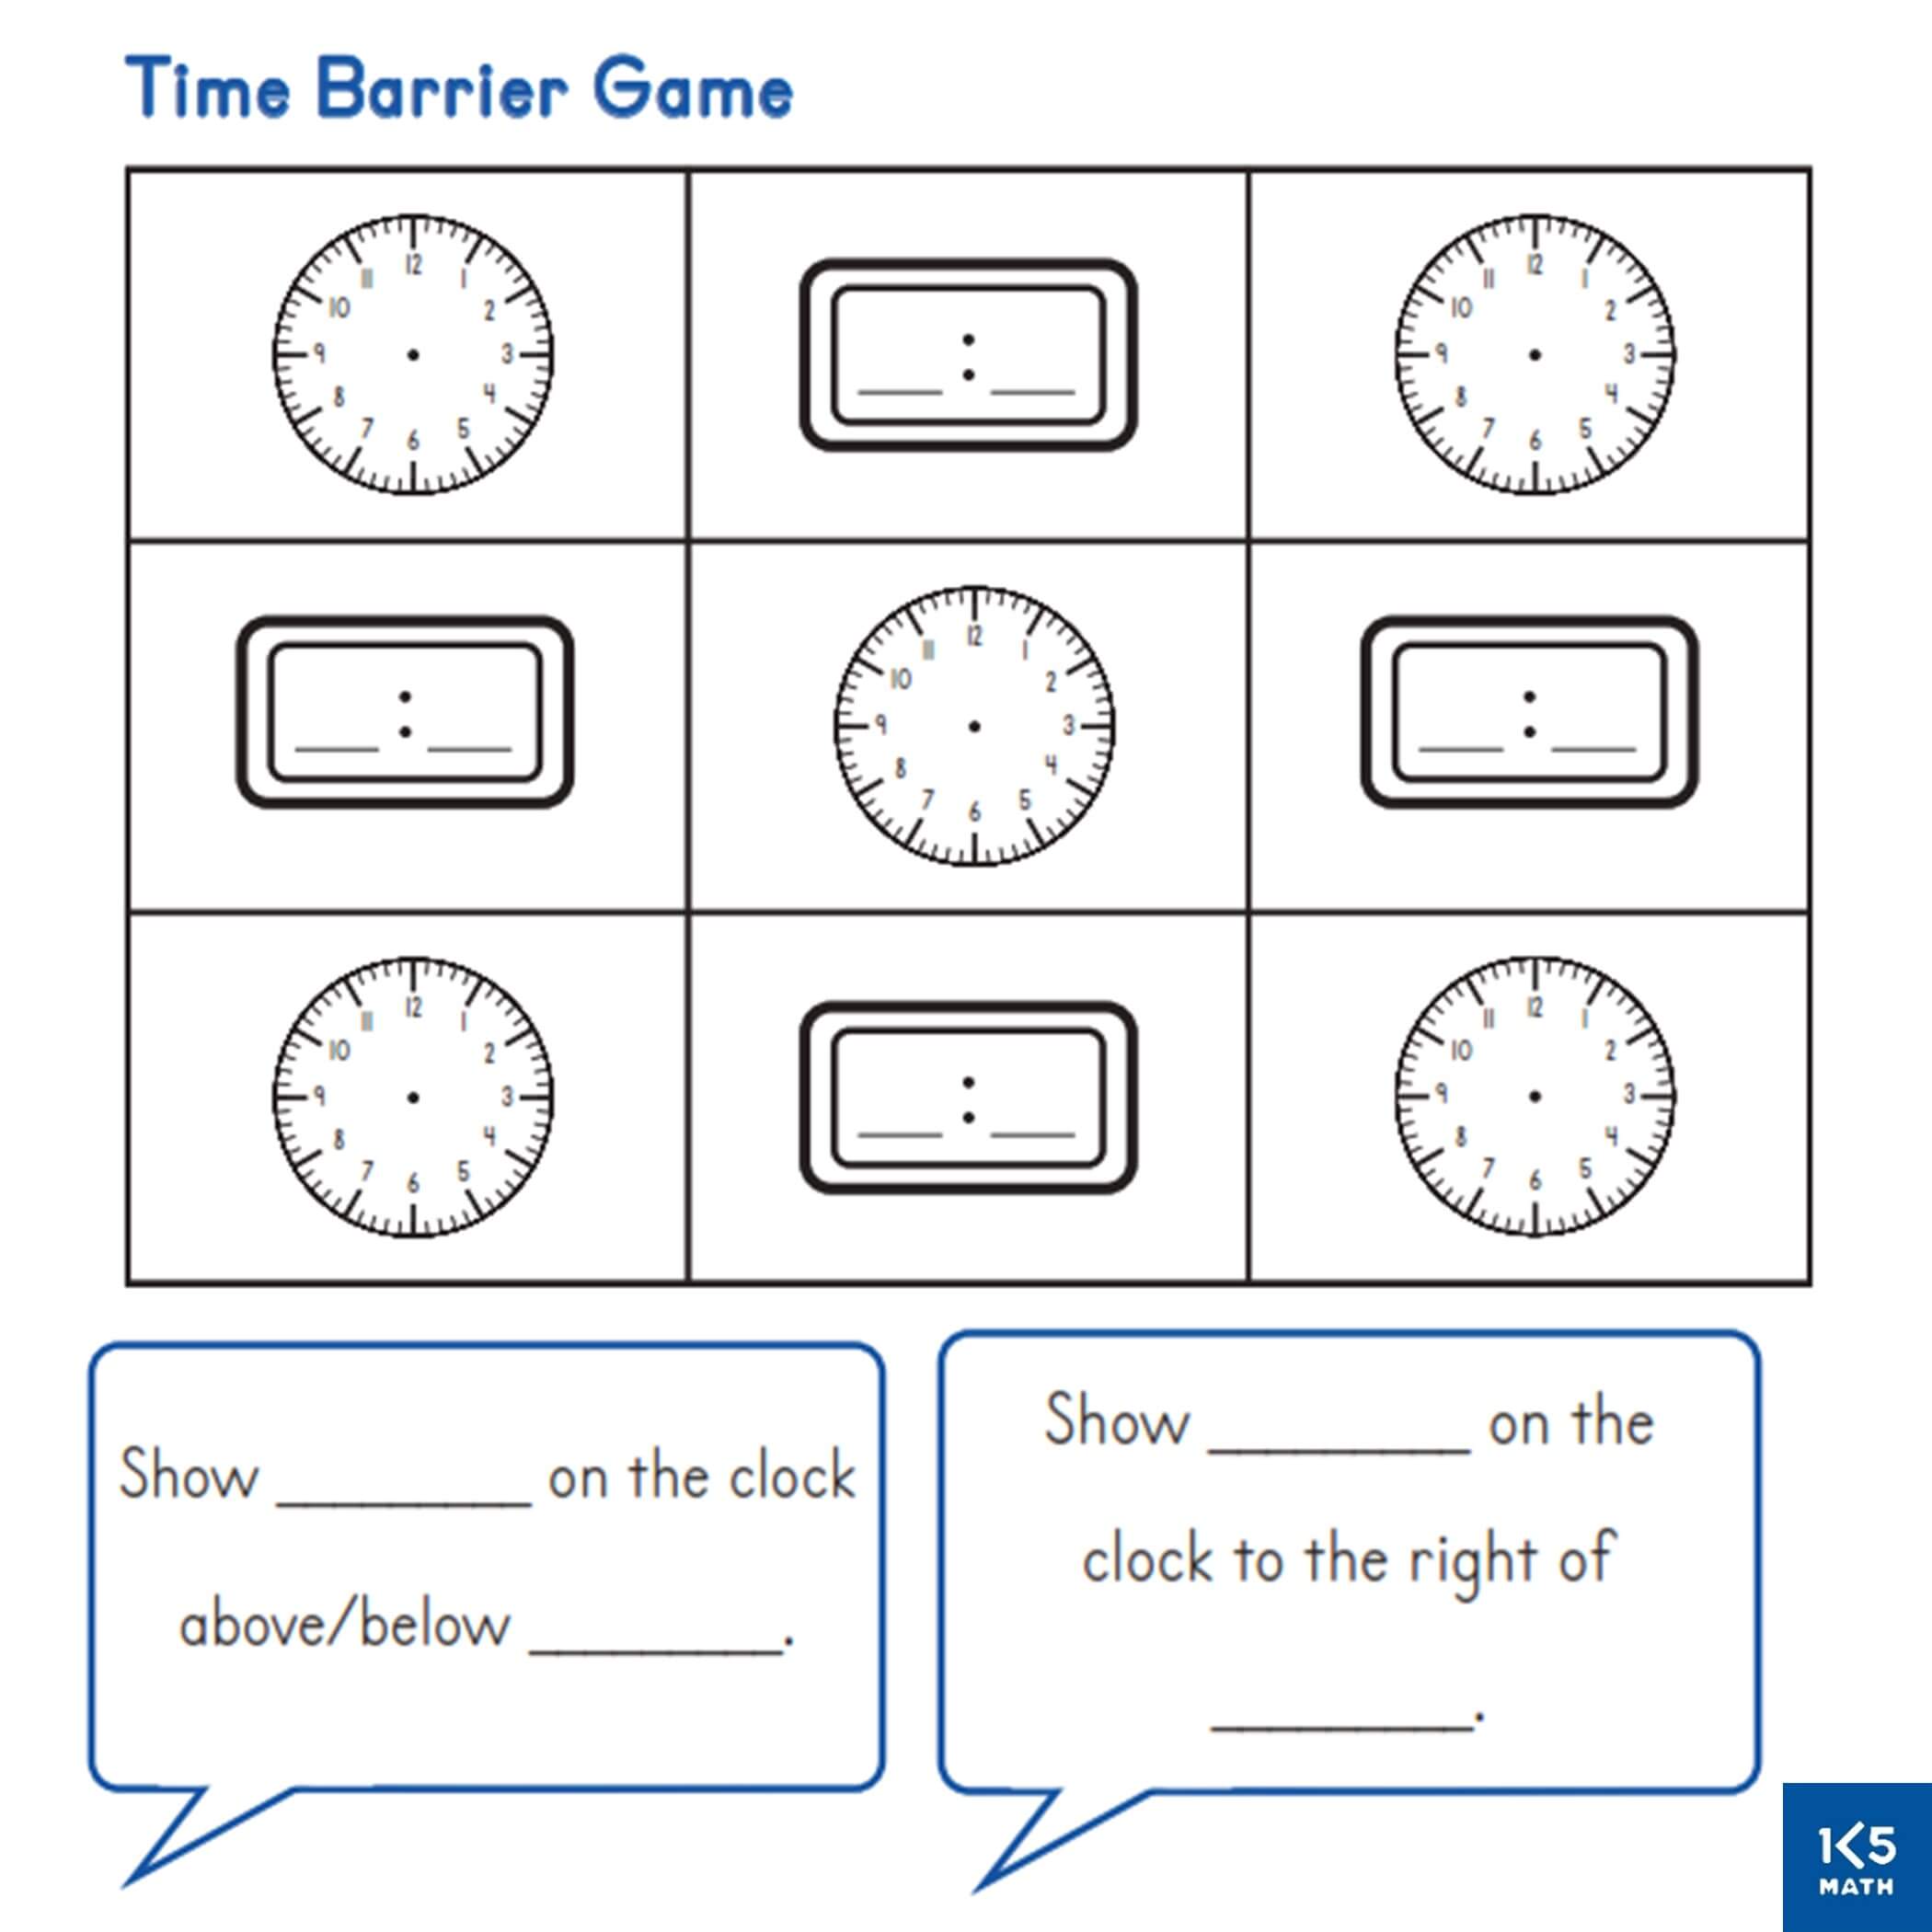 Time Barrier Game